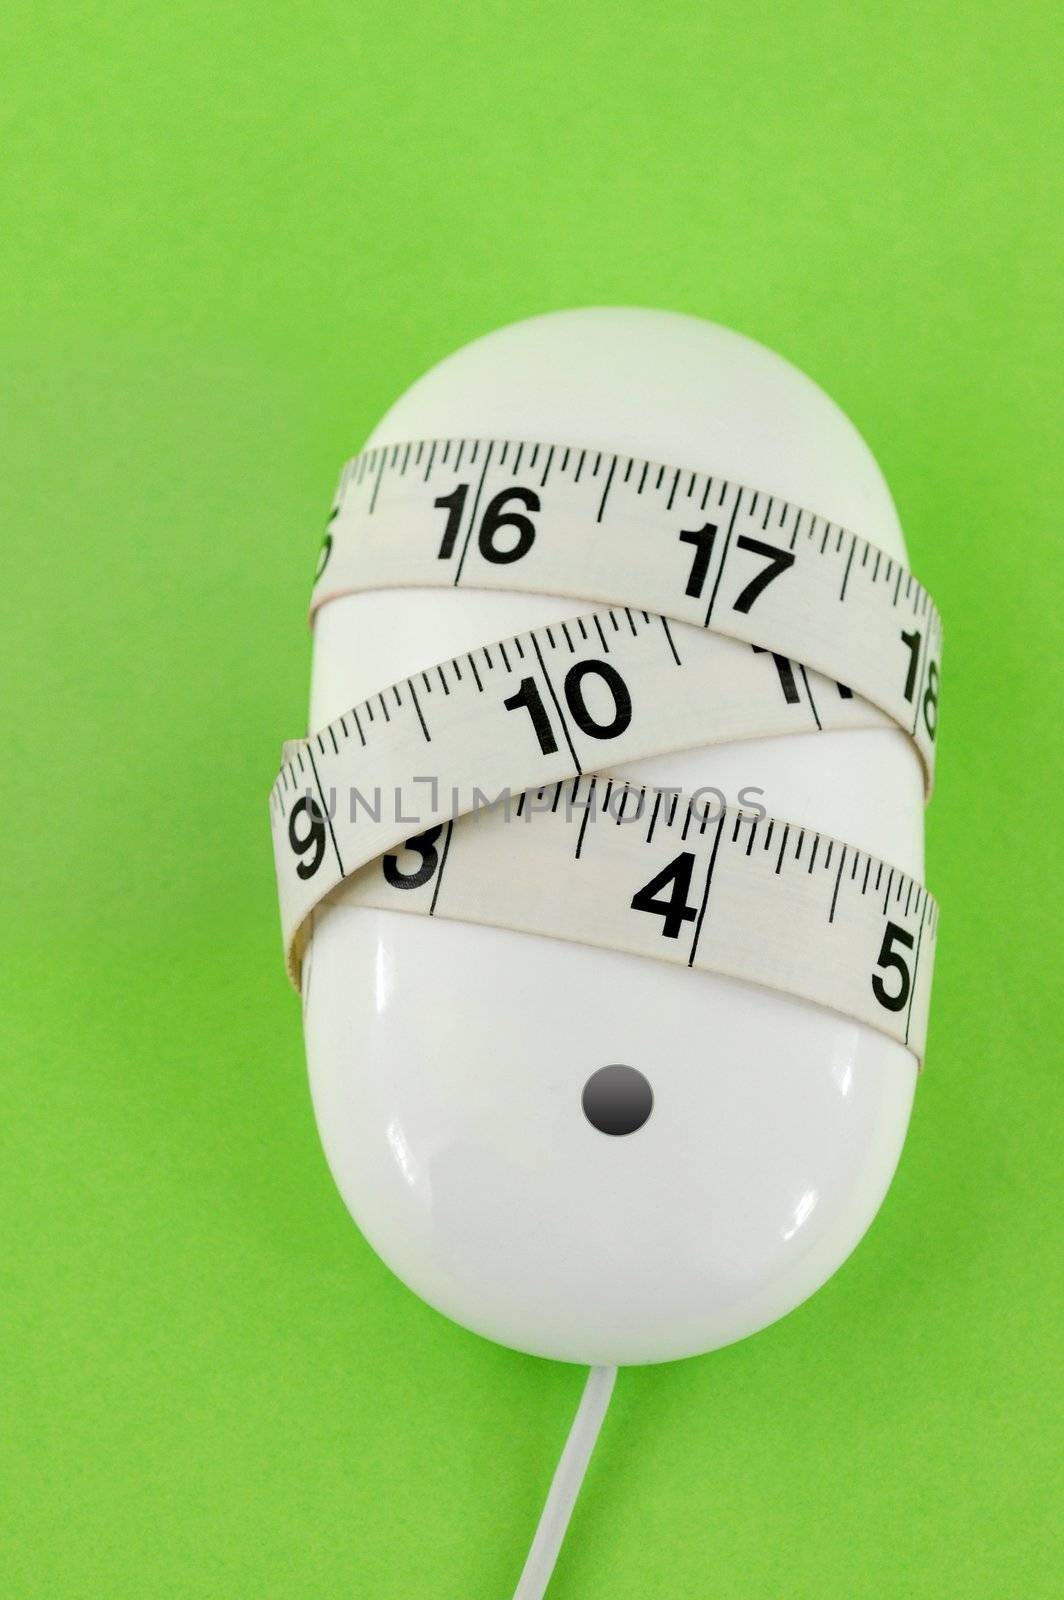 White computer mouse with measuring tape wrapped round it. Green paper background.